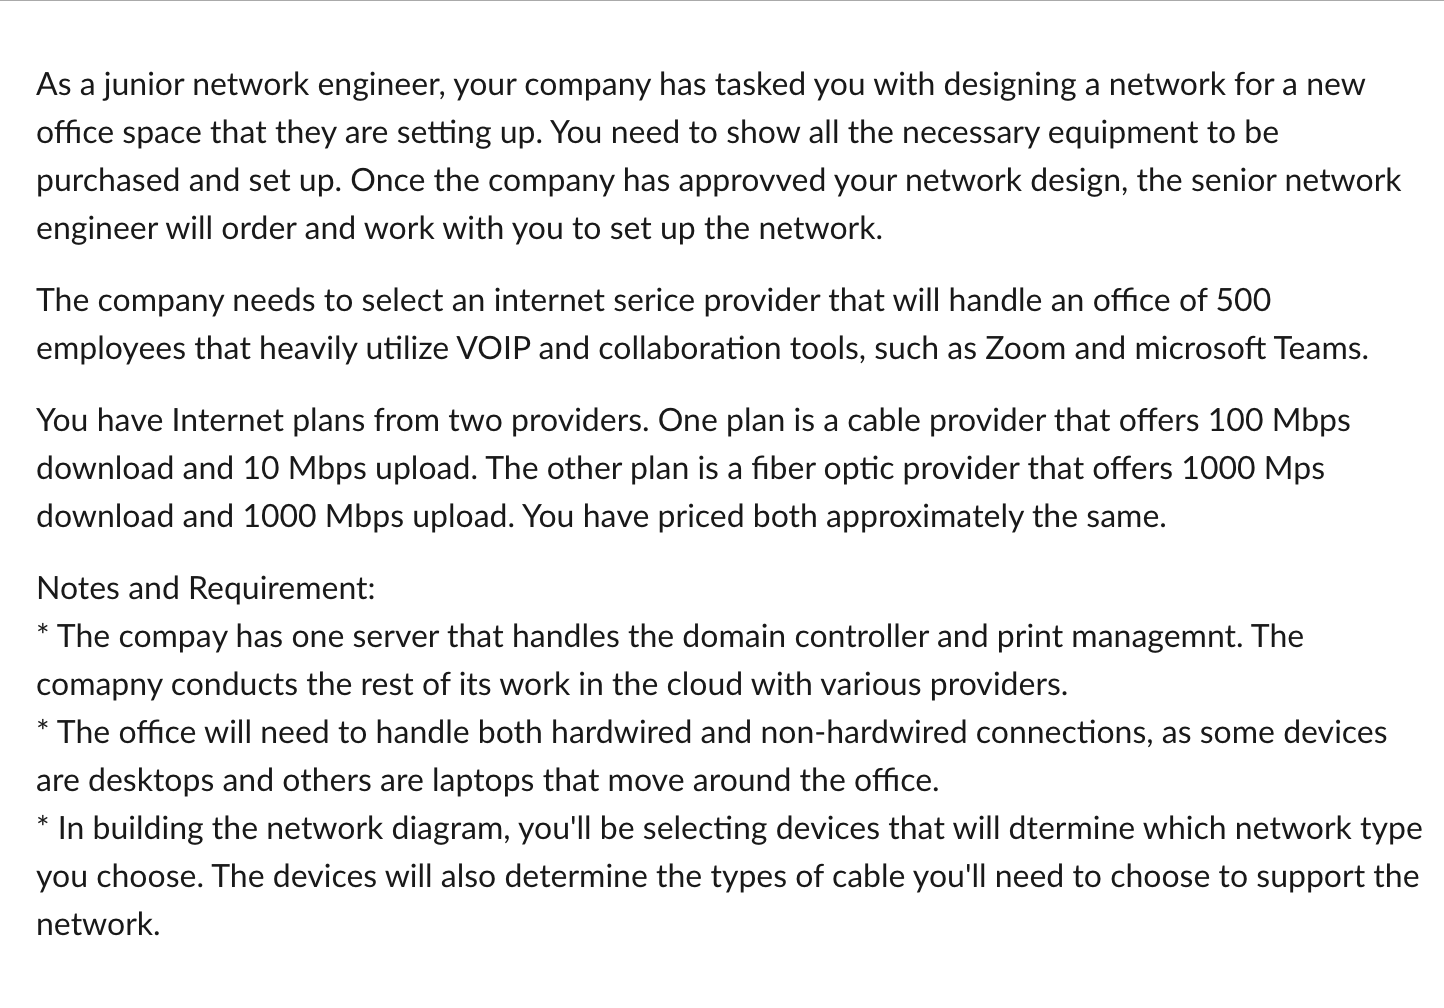 As a junior network engineer, your company has tasked you with designing a network for a new office space